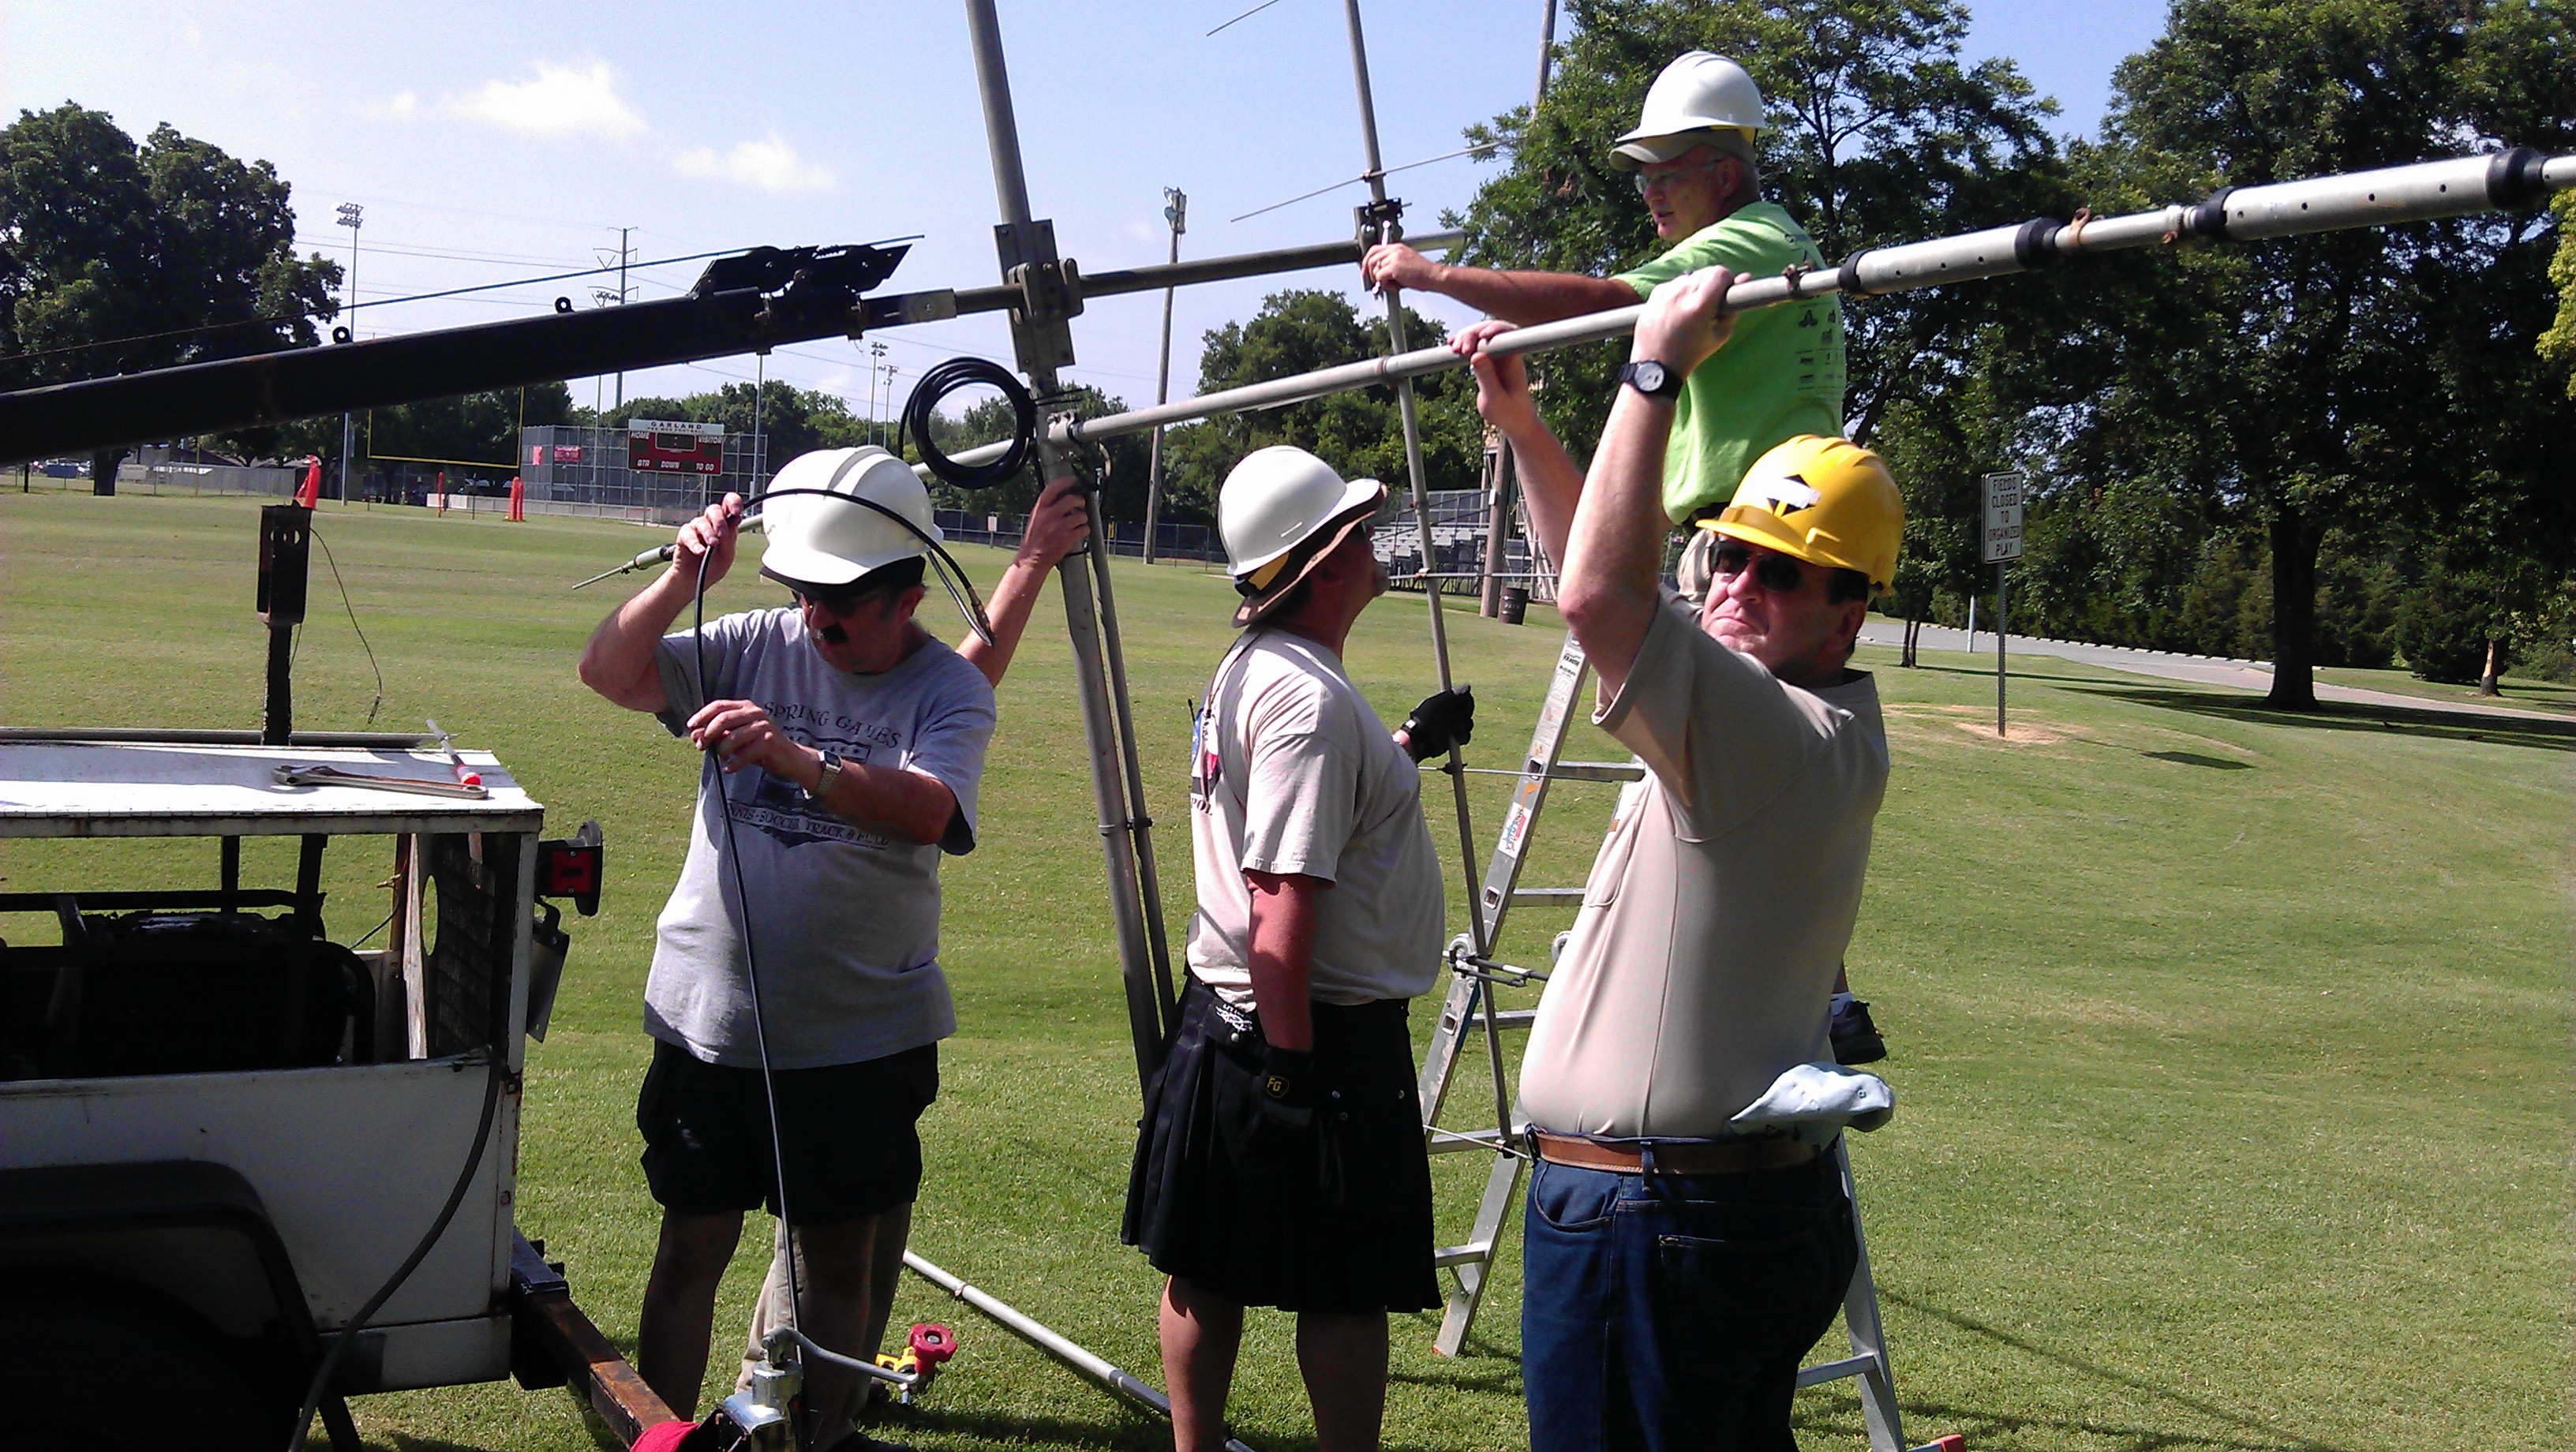 Wayne, Eric, Bill, and William getting the primary antenna ready